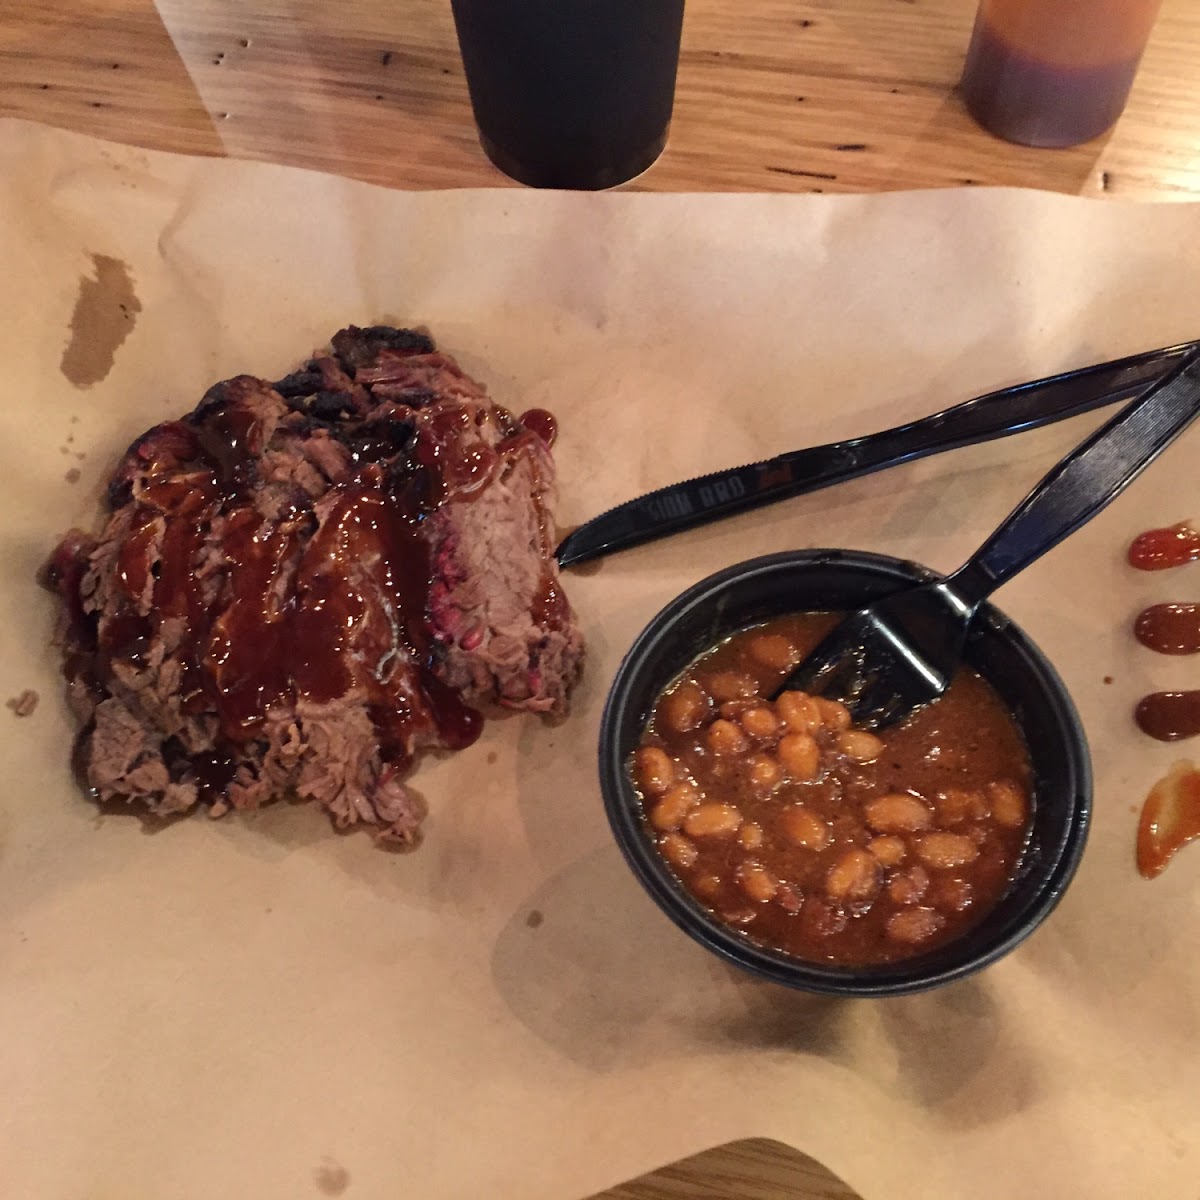 Brisket with smokey mountain bbq sauce. And baked beans. So good!!!!